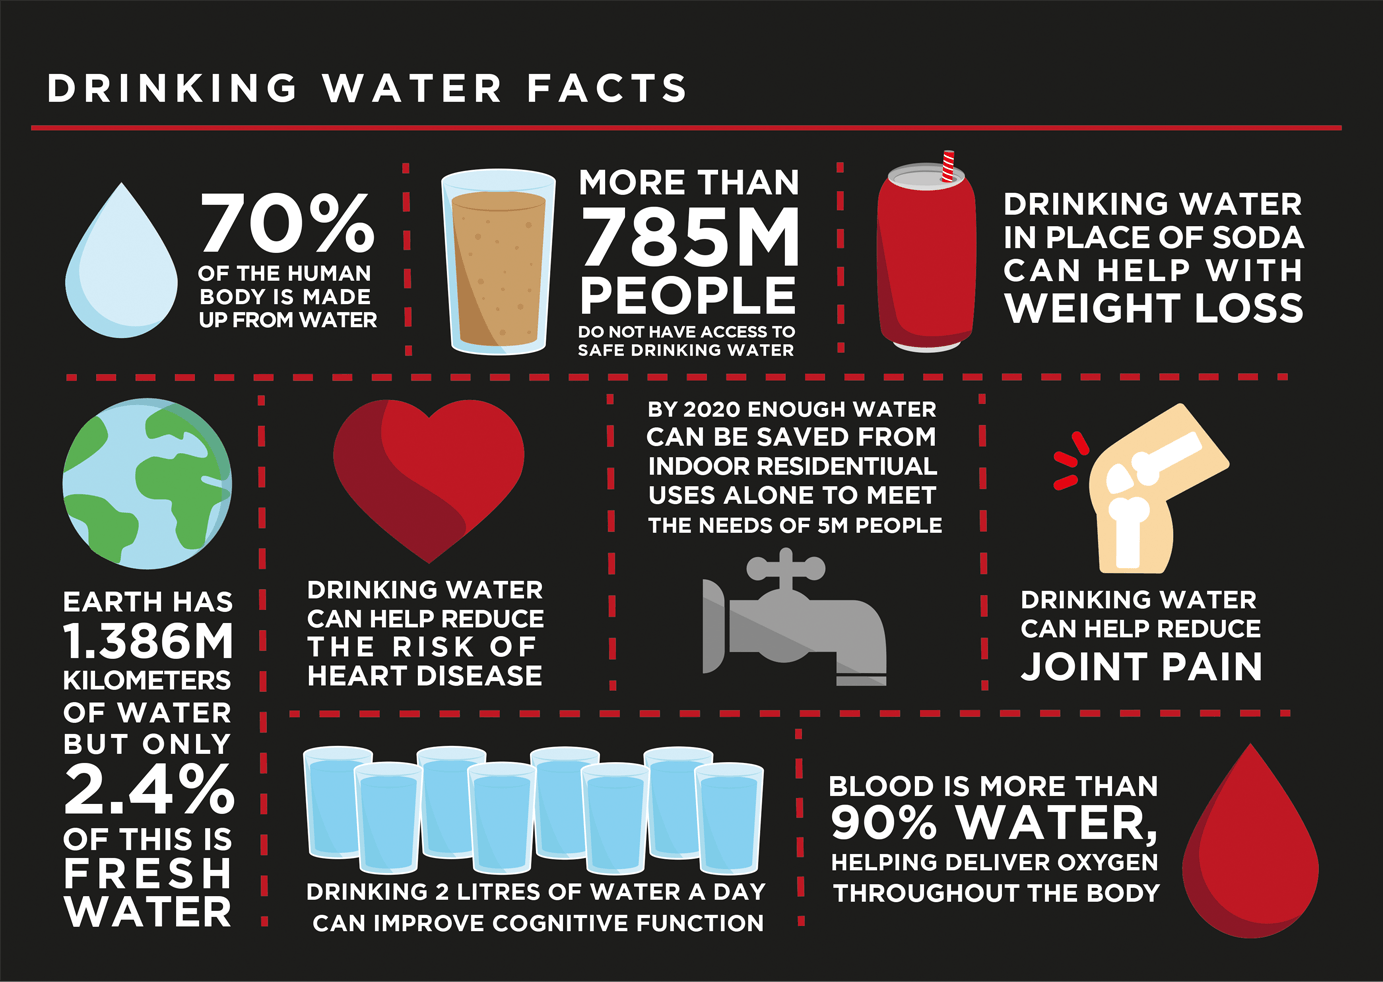 Drinking water facts infographic